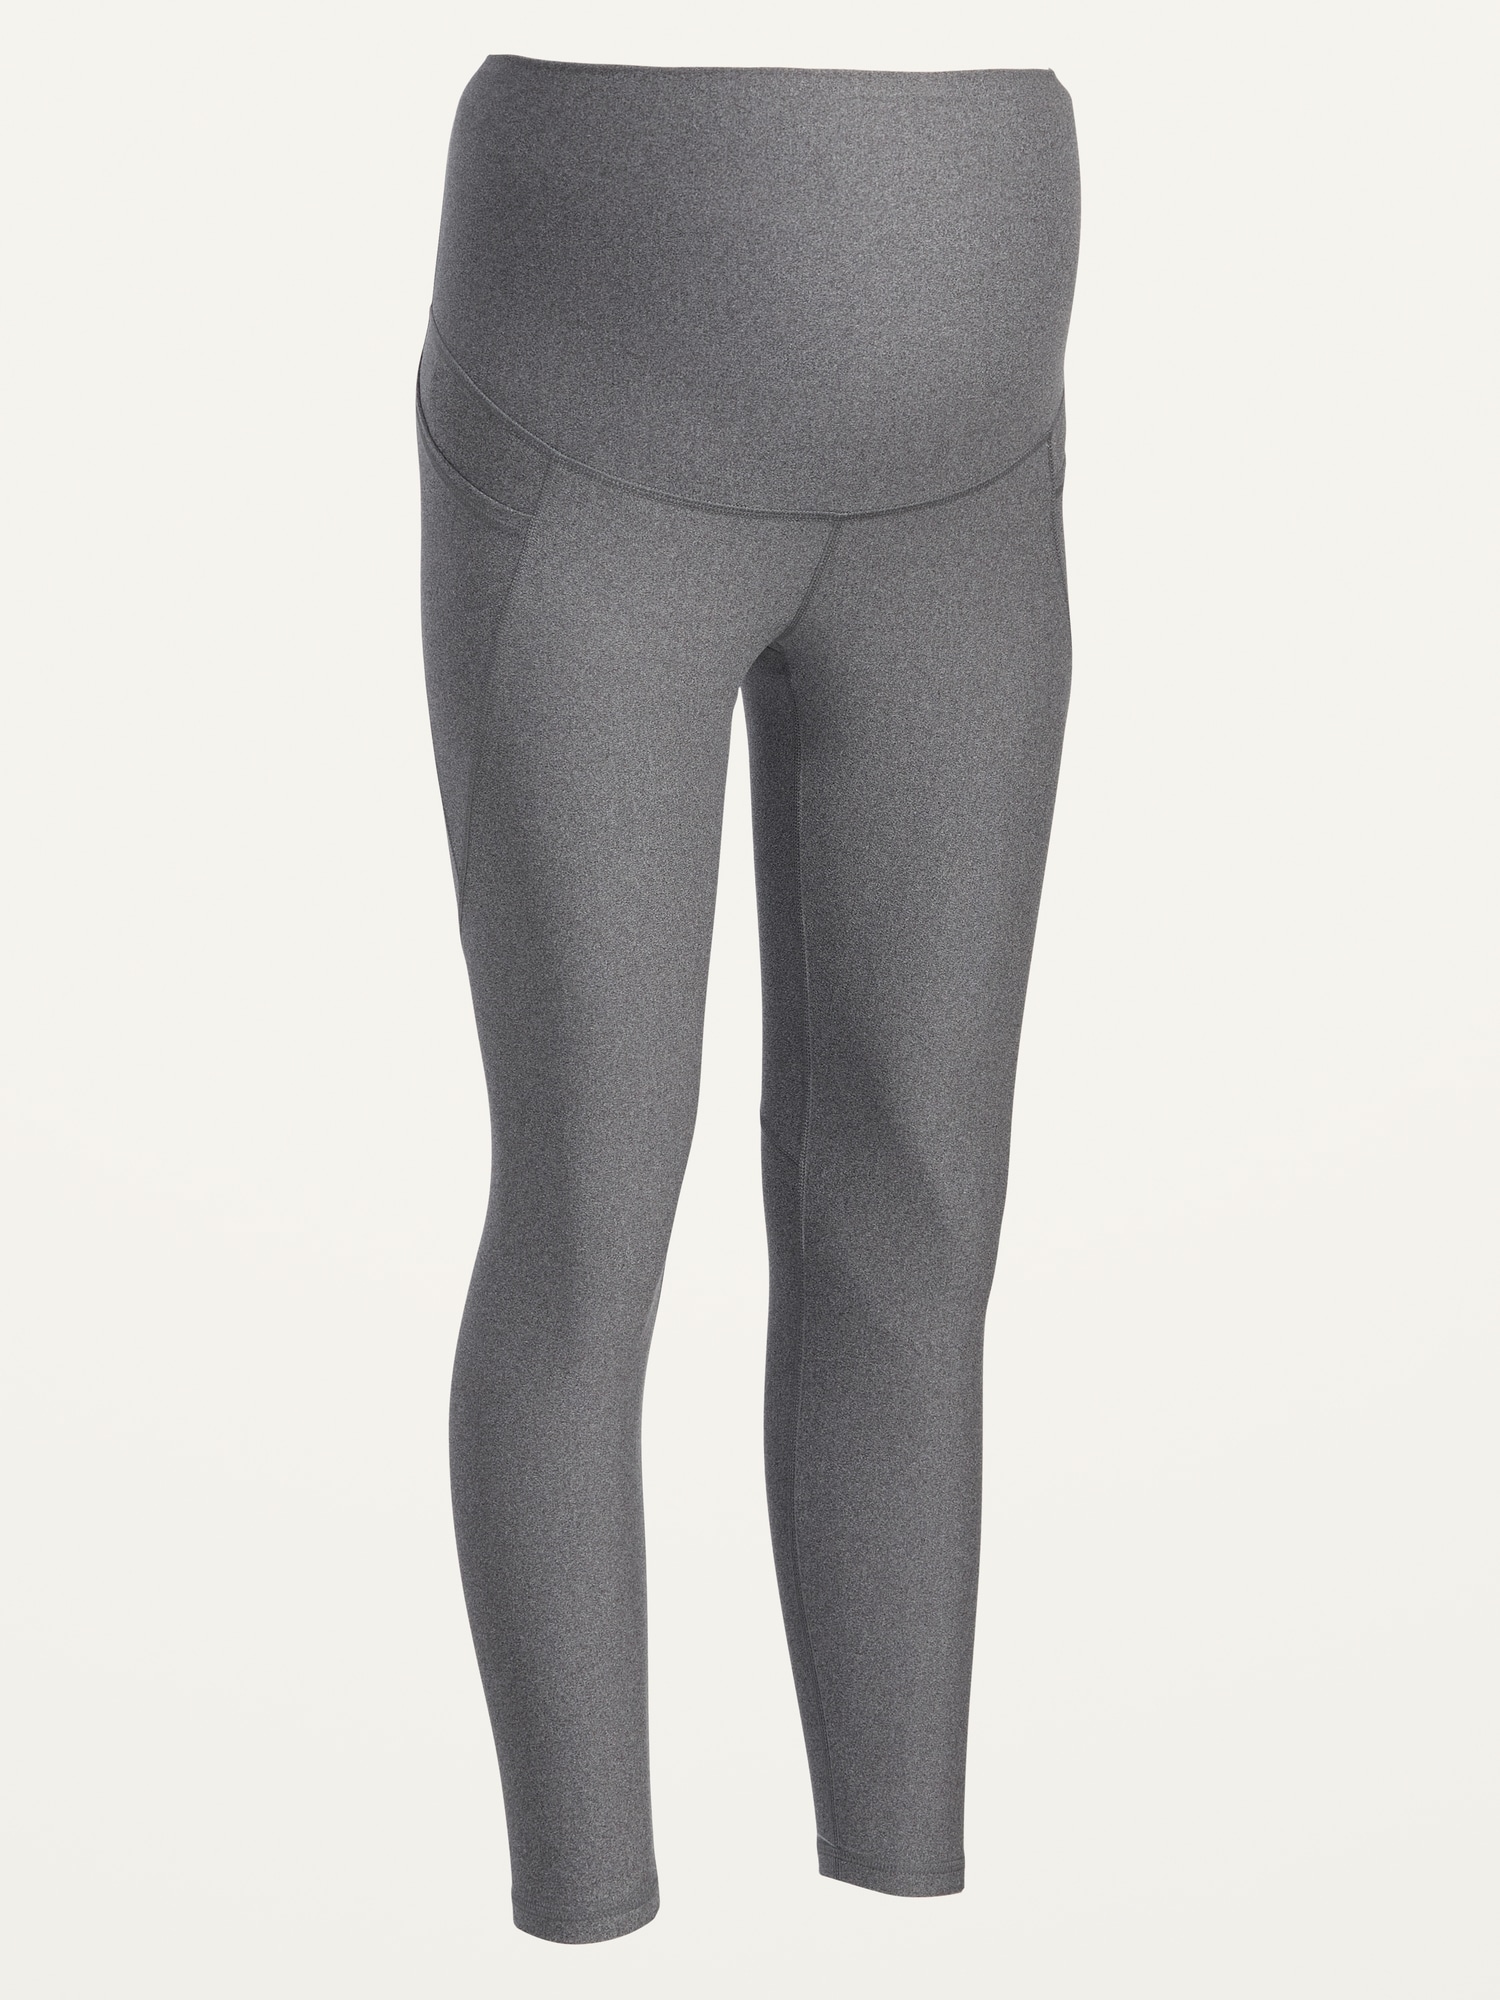 IUGA Supcream Buttery-soft Maternity Legging With Pockets-Charcoal -  Charcoal / S